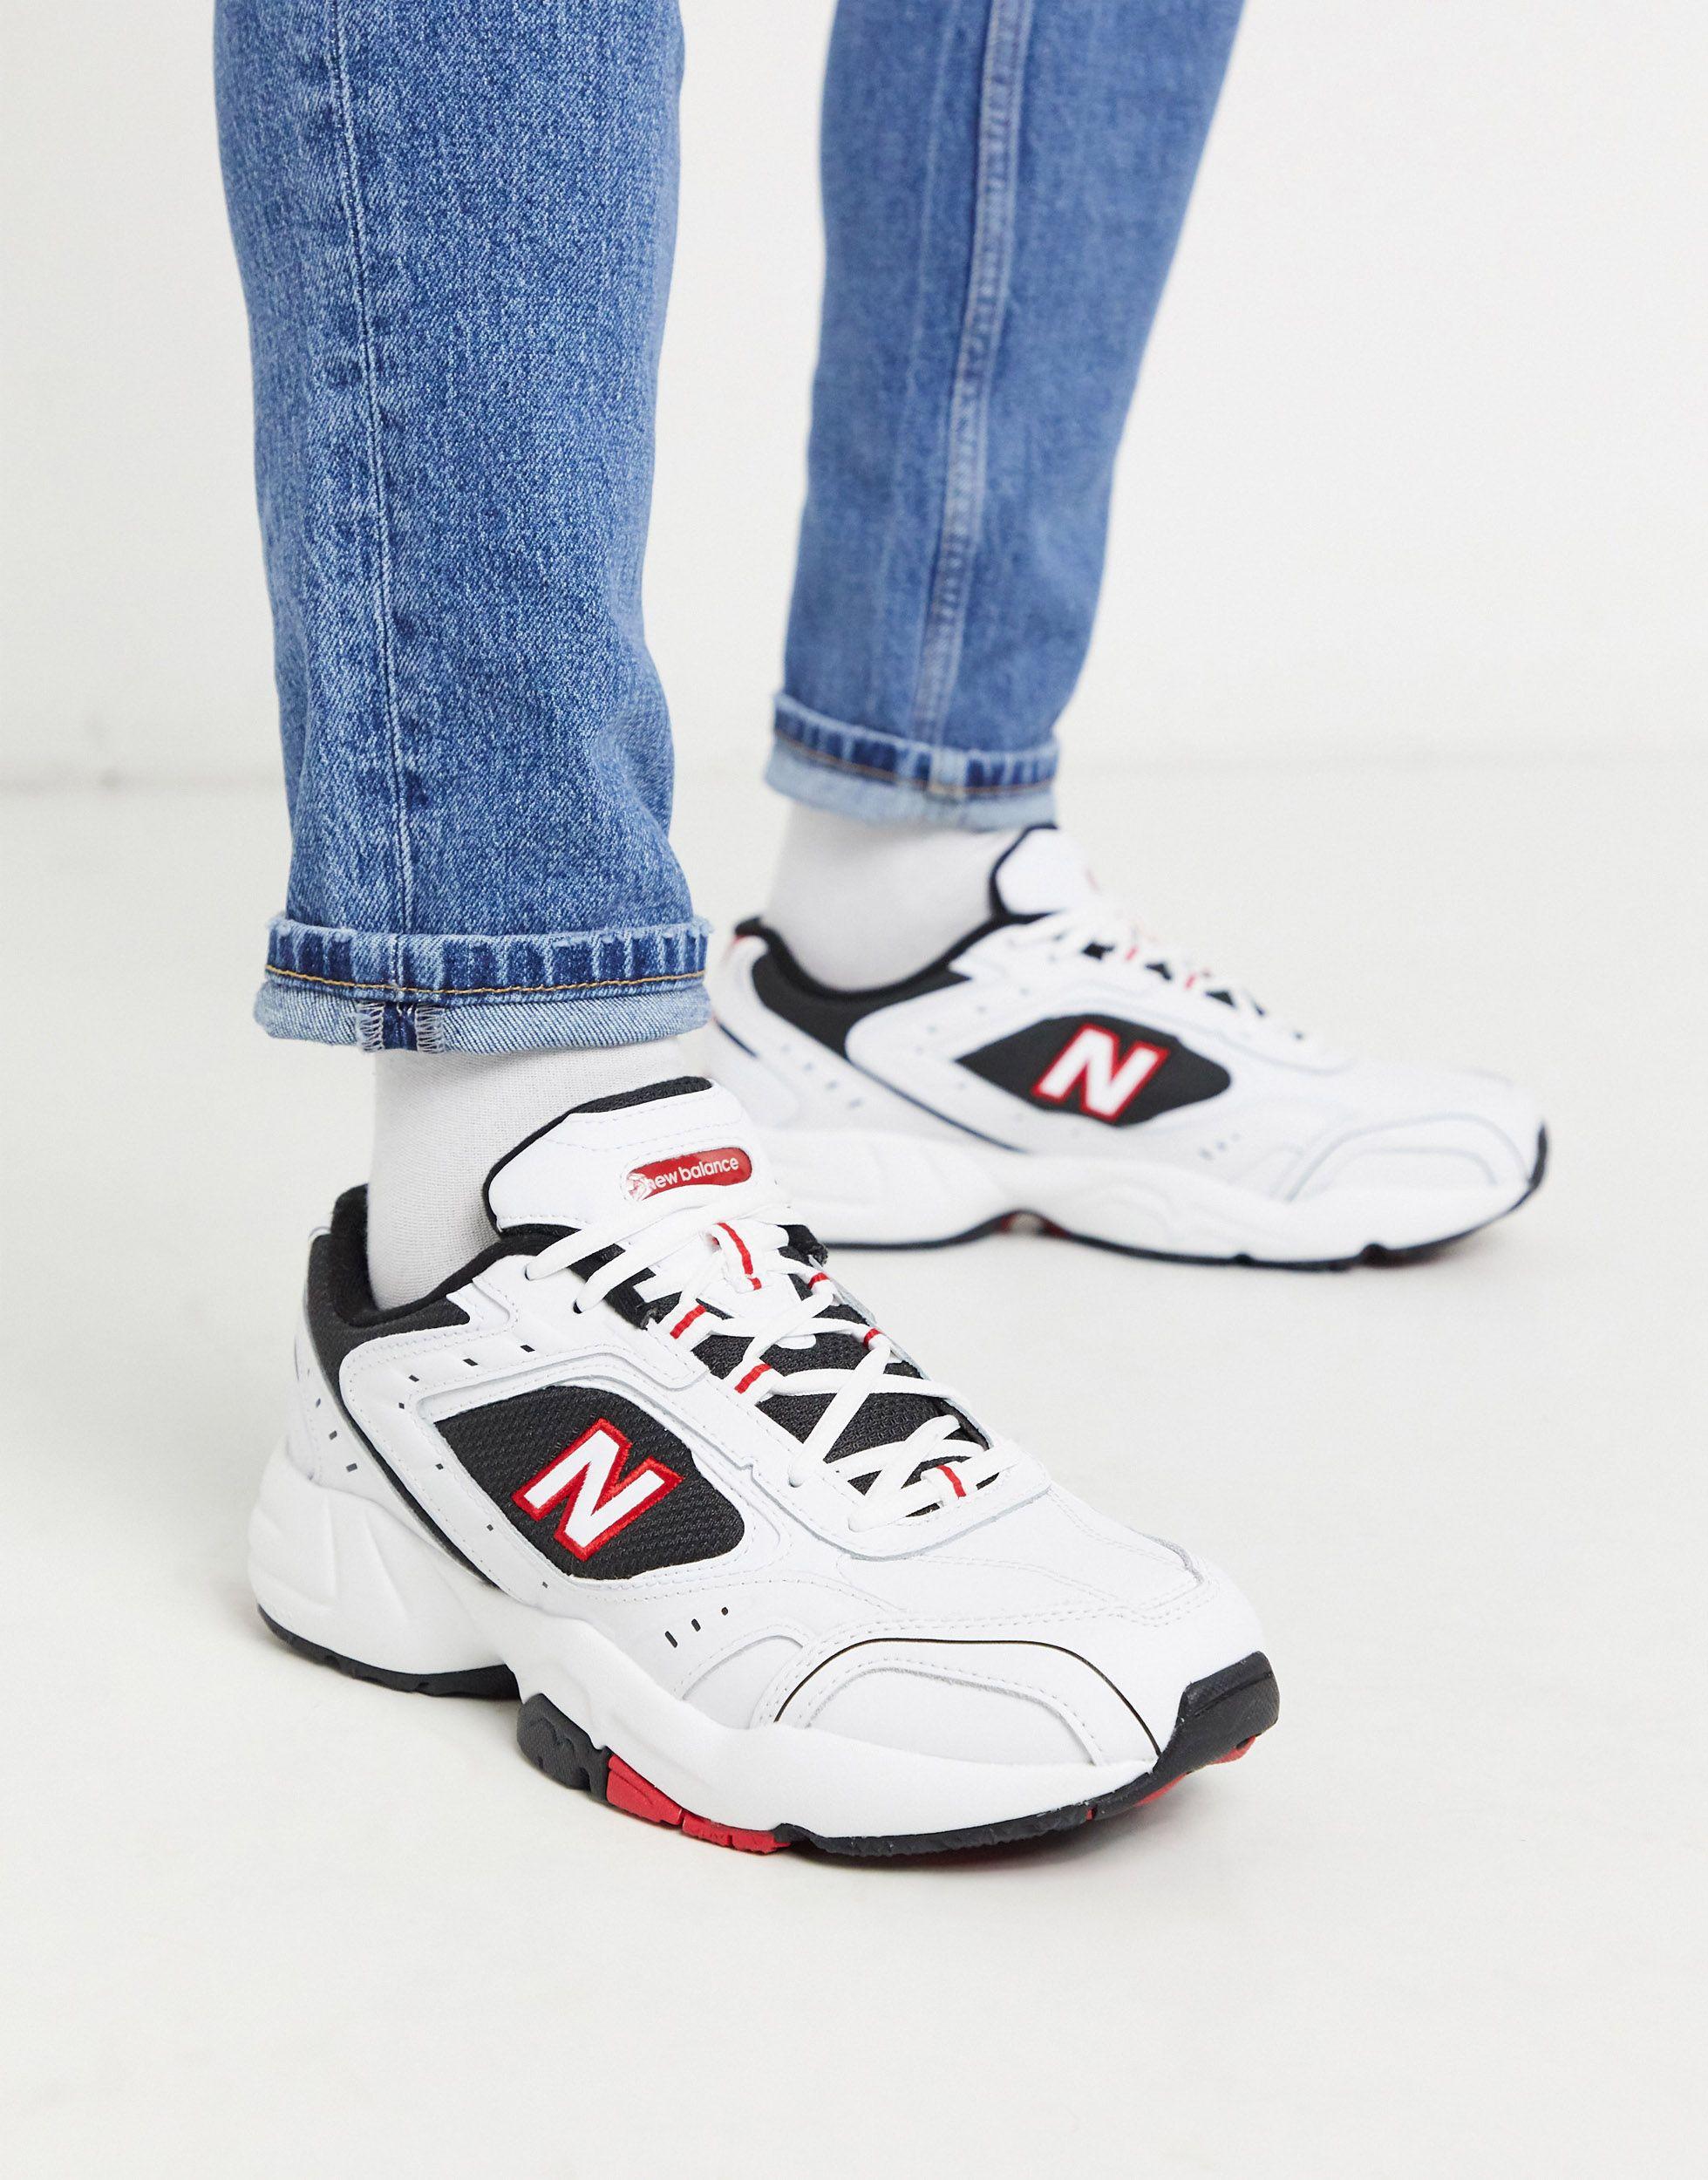 New Balance 452 Sneaker in Black (White) - Save 39% - Lyst